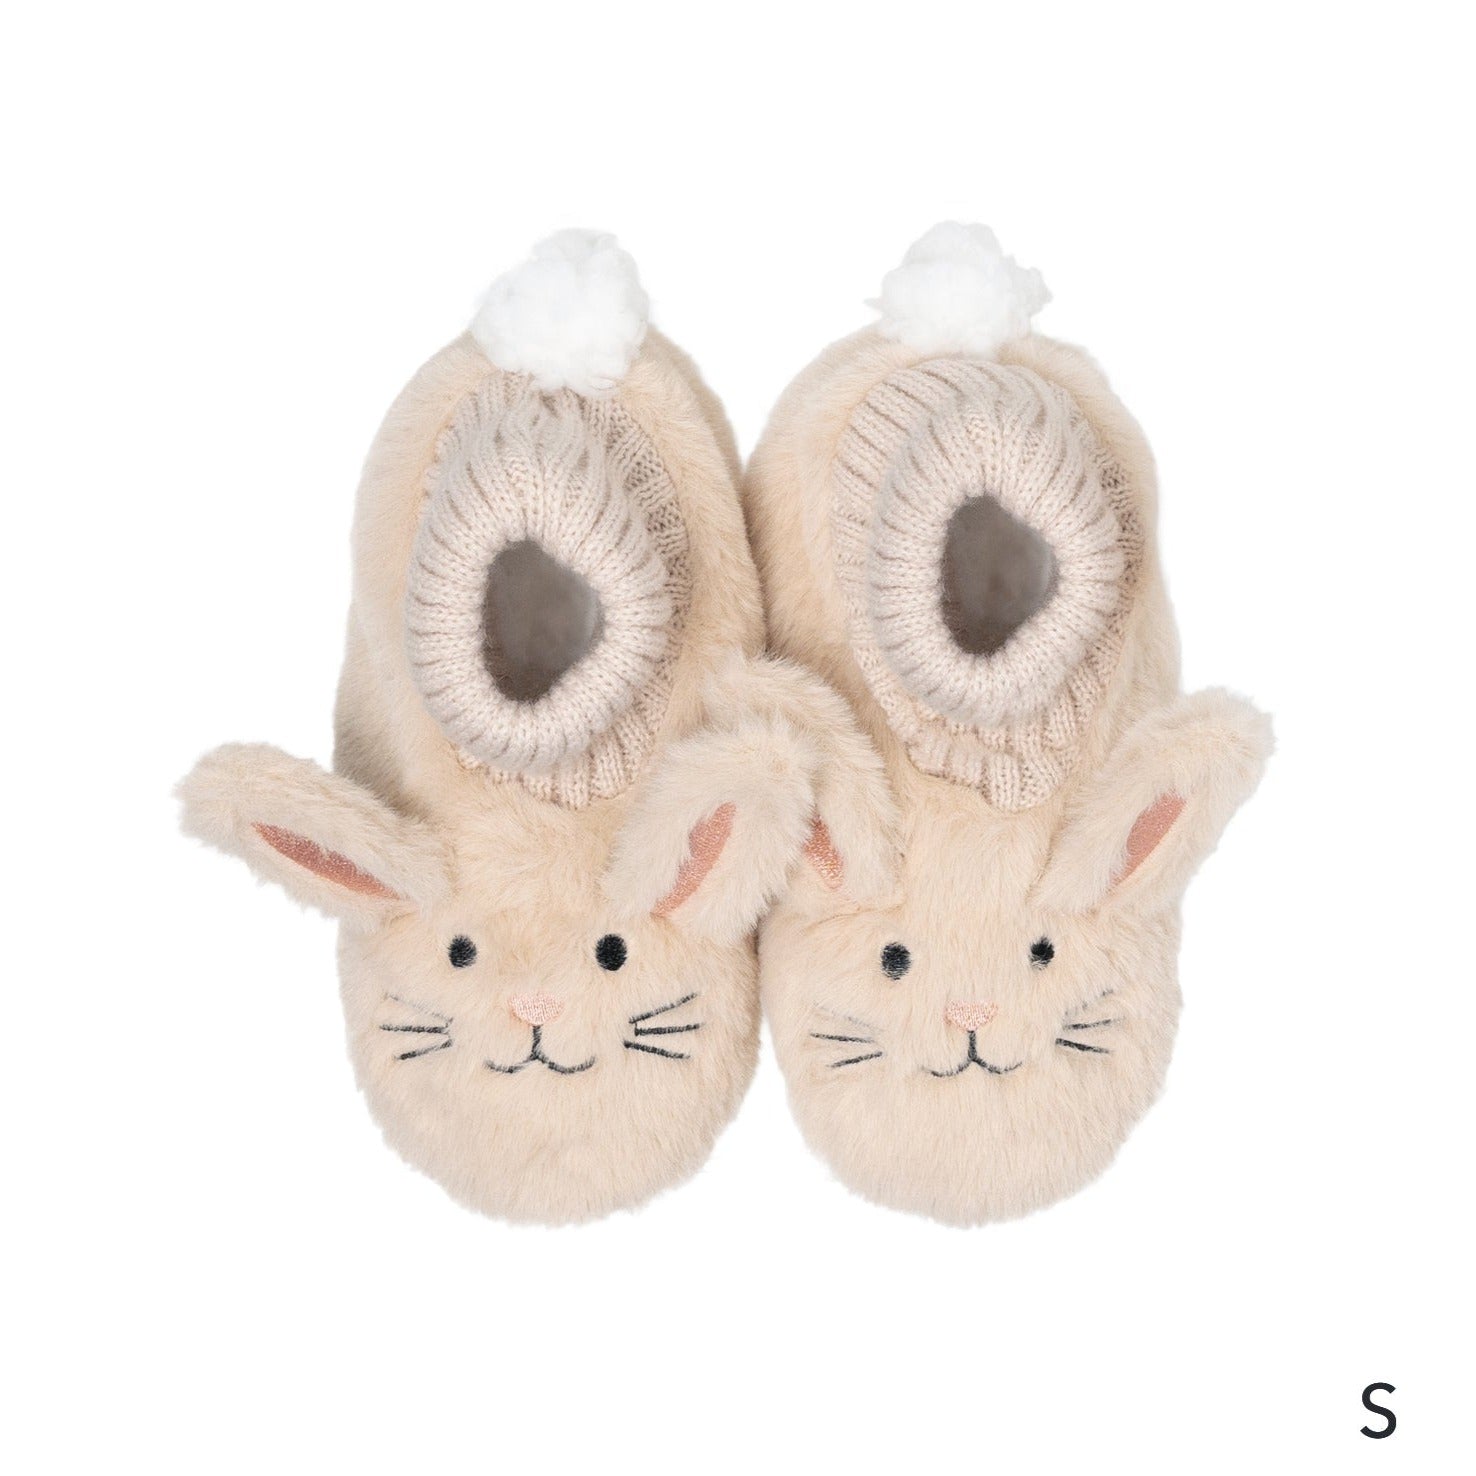 snuggupps slippers - angus and dudley